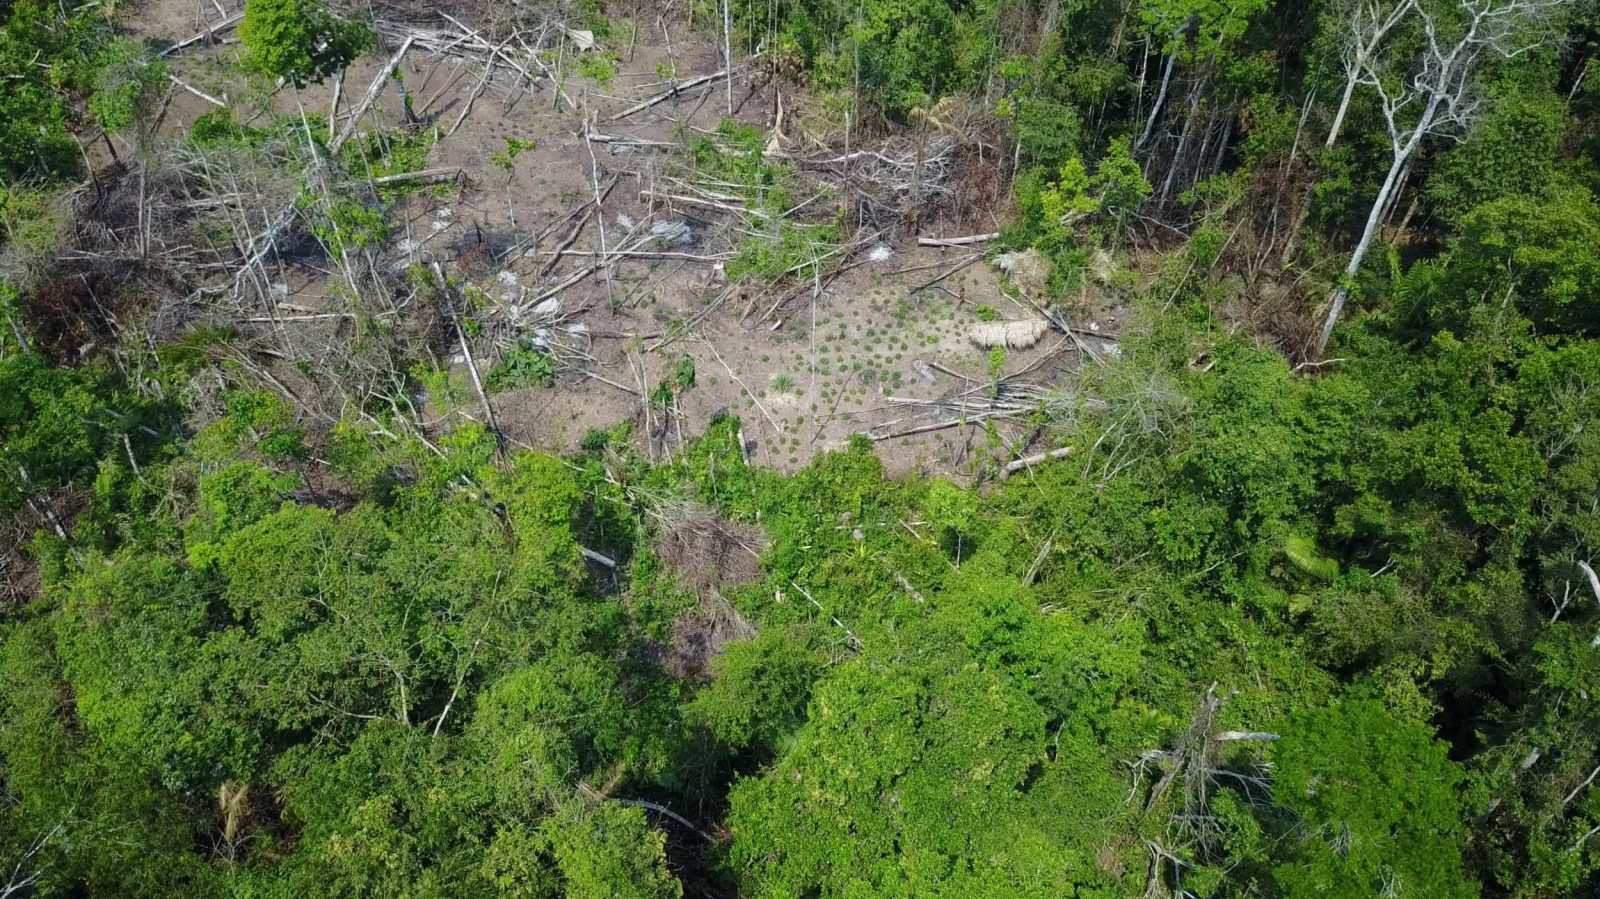 Brazilian government dept. Funai releases drone footage of isolated tribe